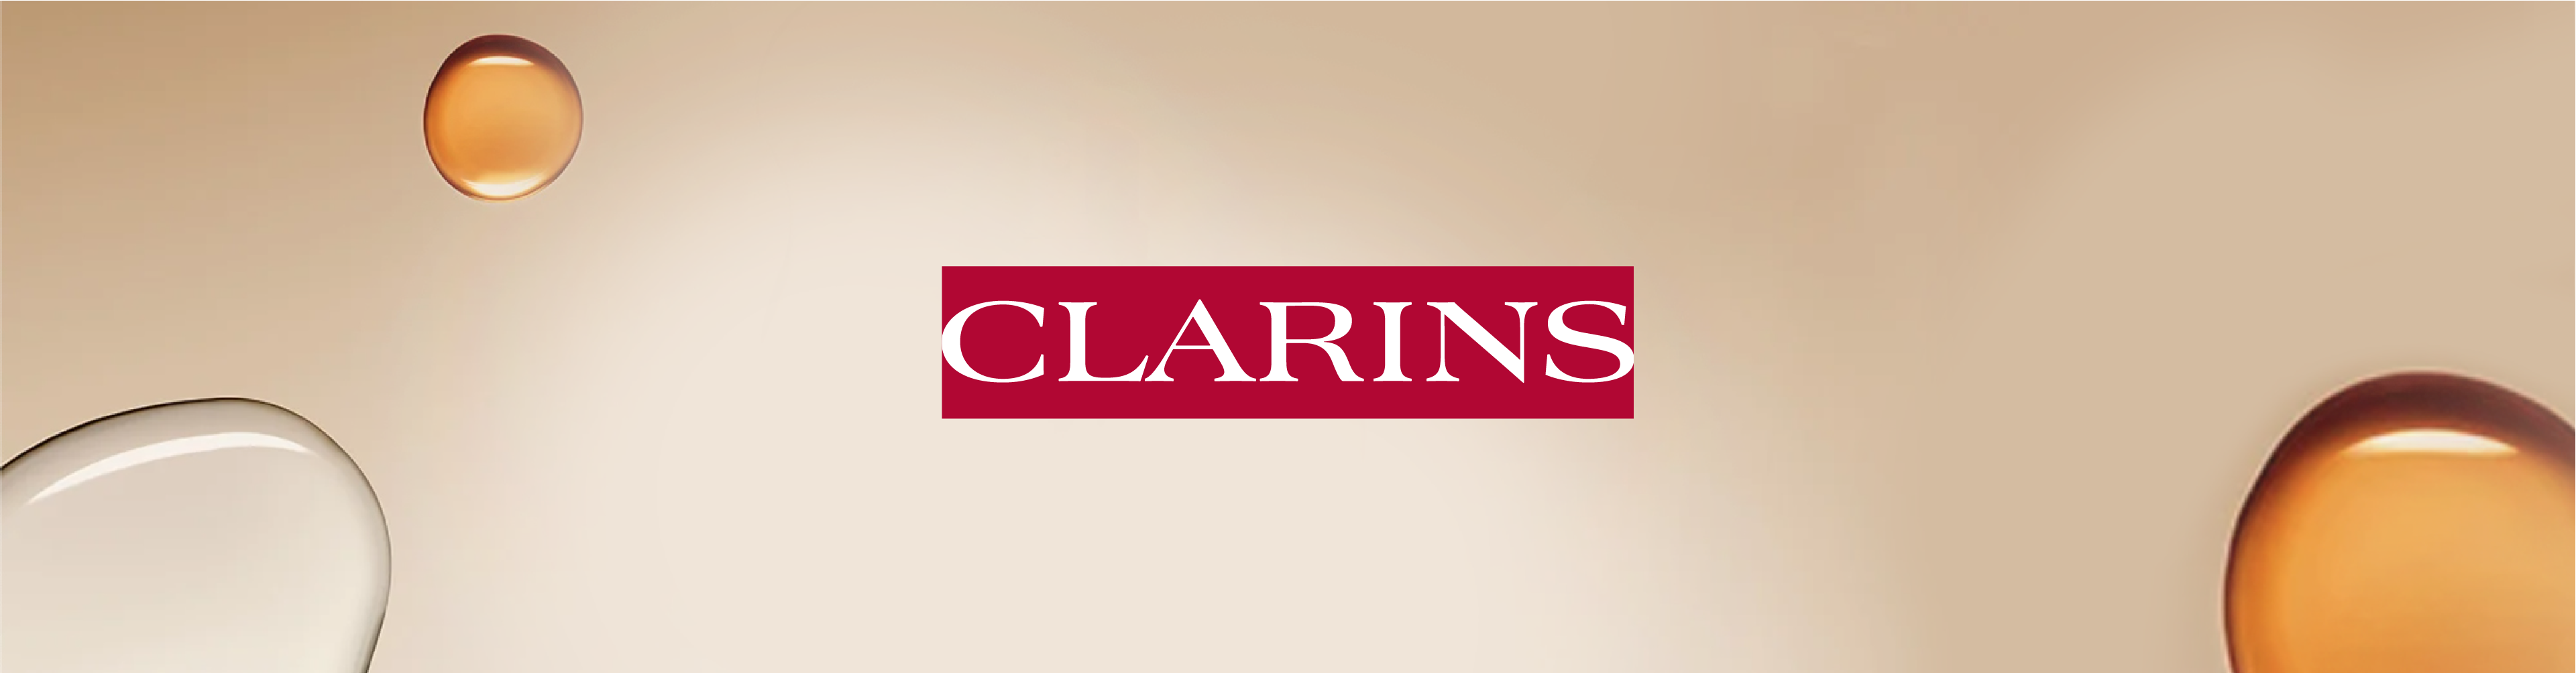 Banner Clarins Campaign